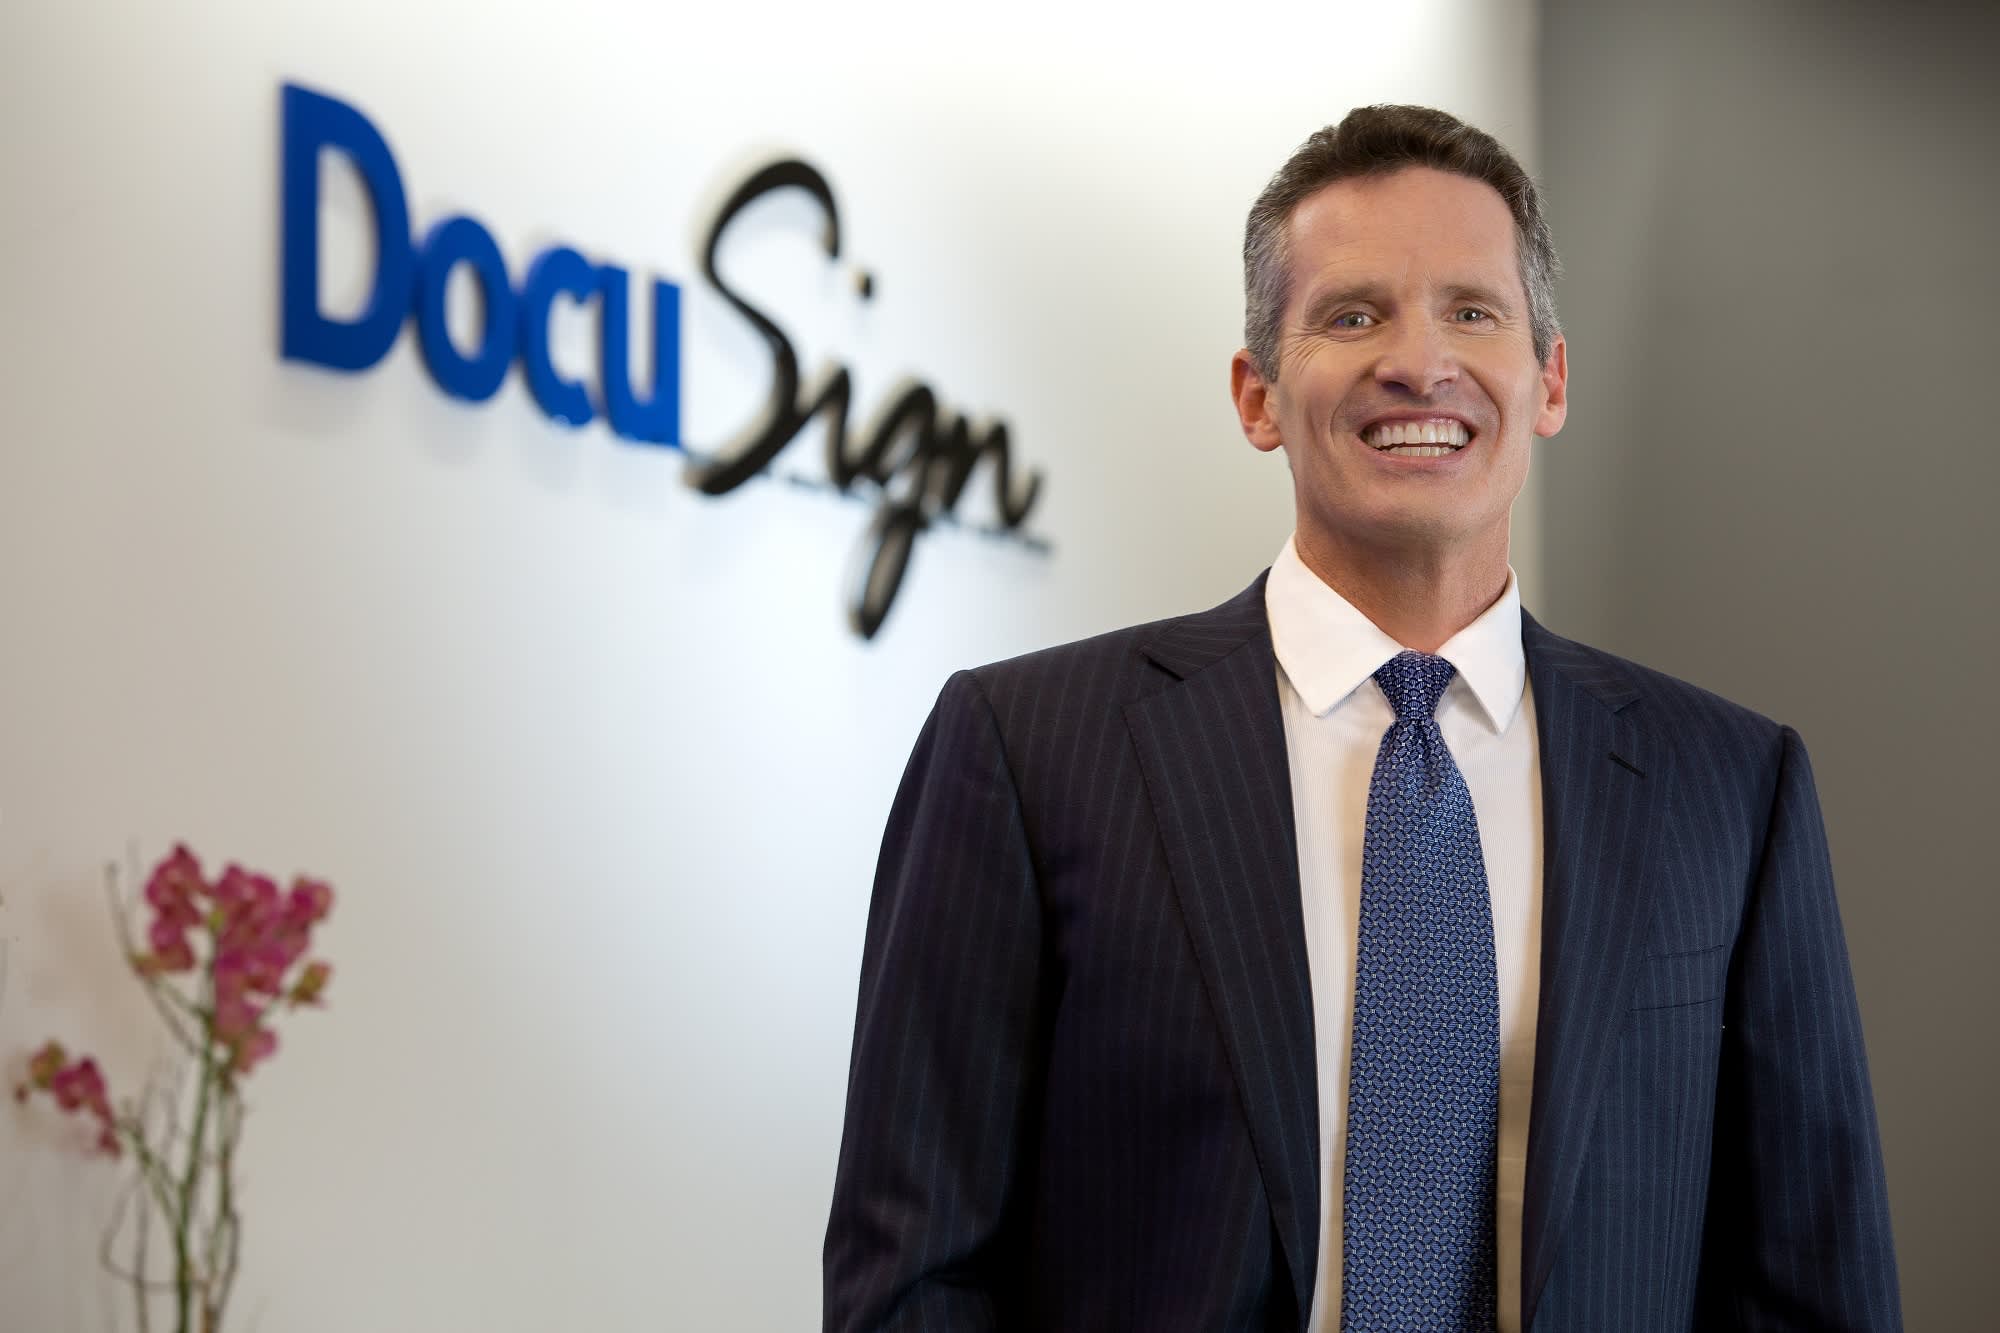 DocuSign (DOCU) plunges almost 30% after Q3 earnings